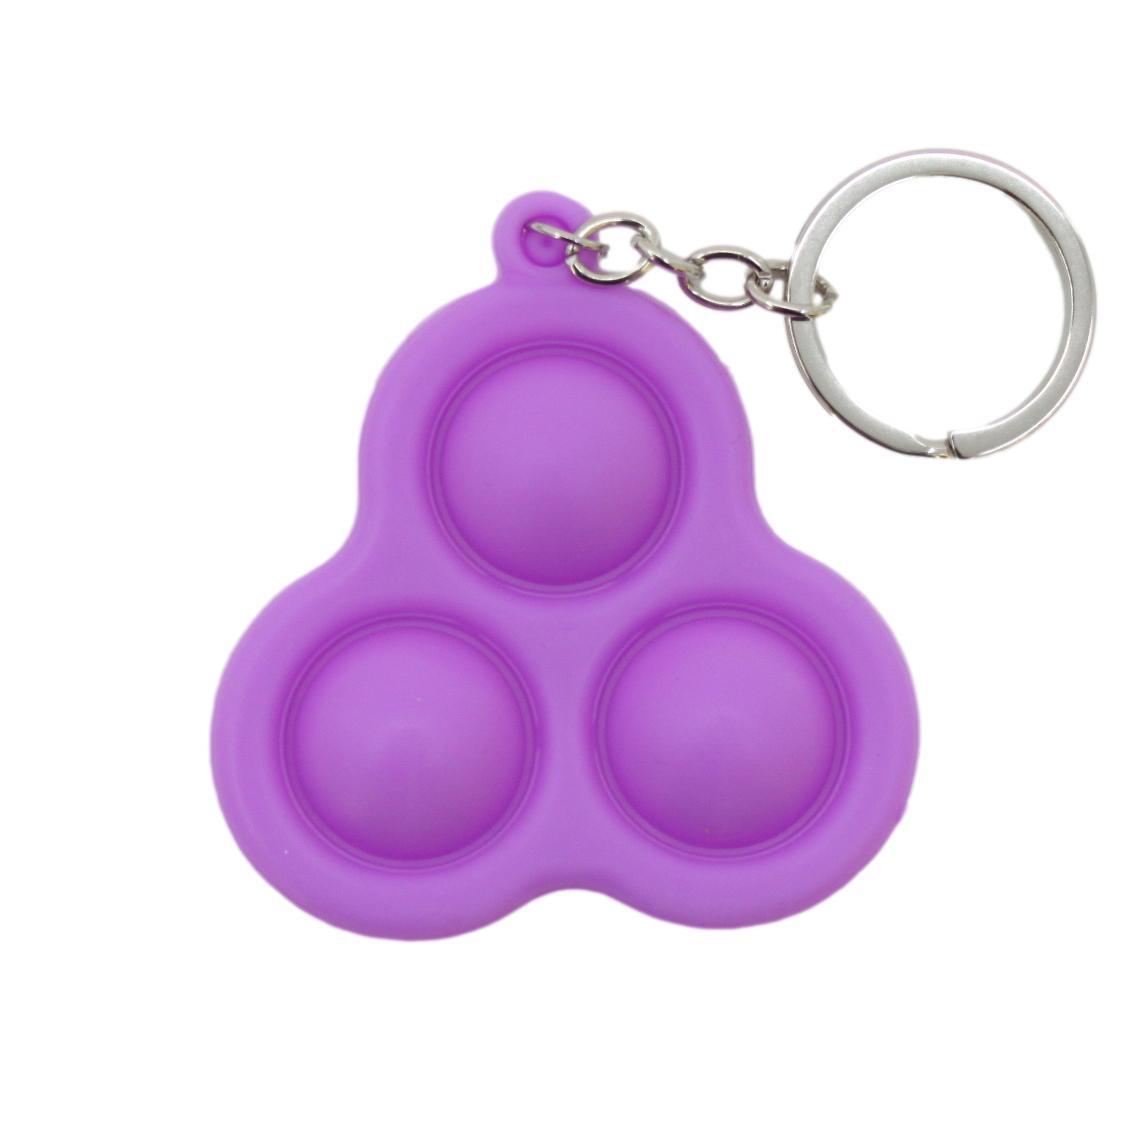 Gprince Cheap Fidget Toys Keychain Push Bubble Simple Dimple Sensory Anti  Stress Reliever For Adult Kids Popite Fidget Toy Free Shipping 